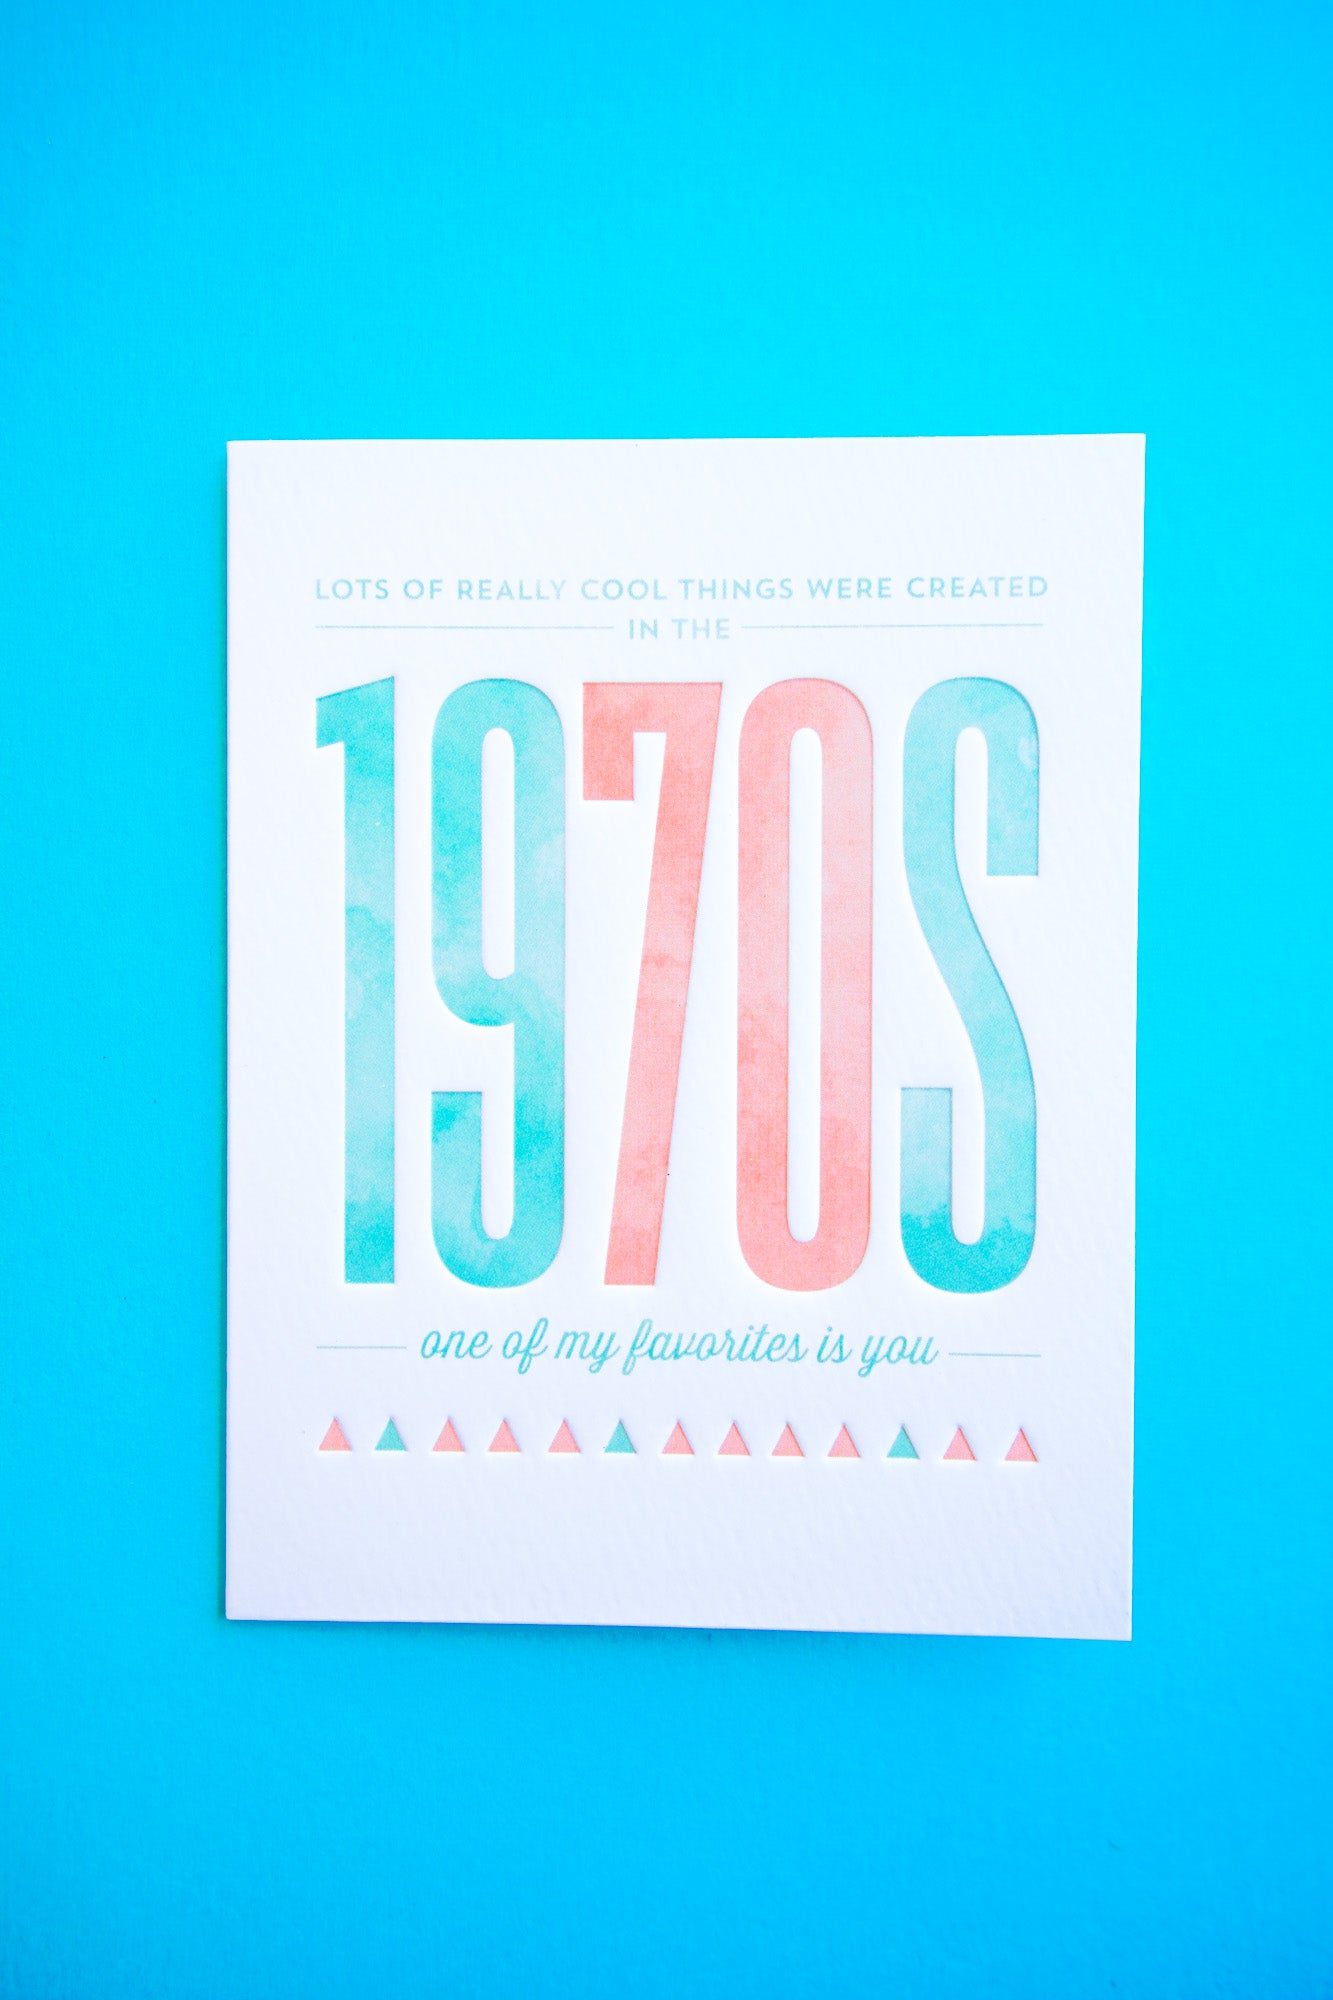 Birthday - The 1970s Card - Gia Graham - Cardmore